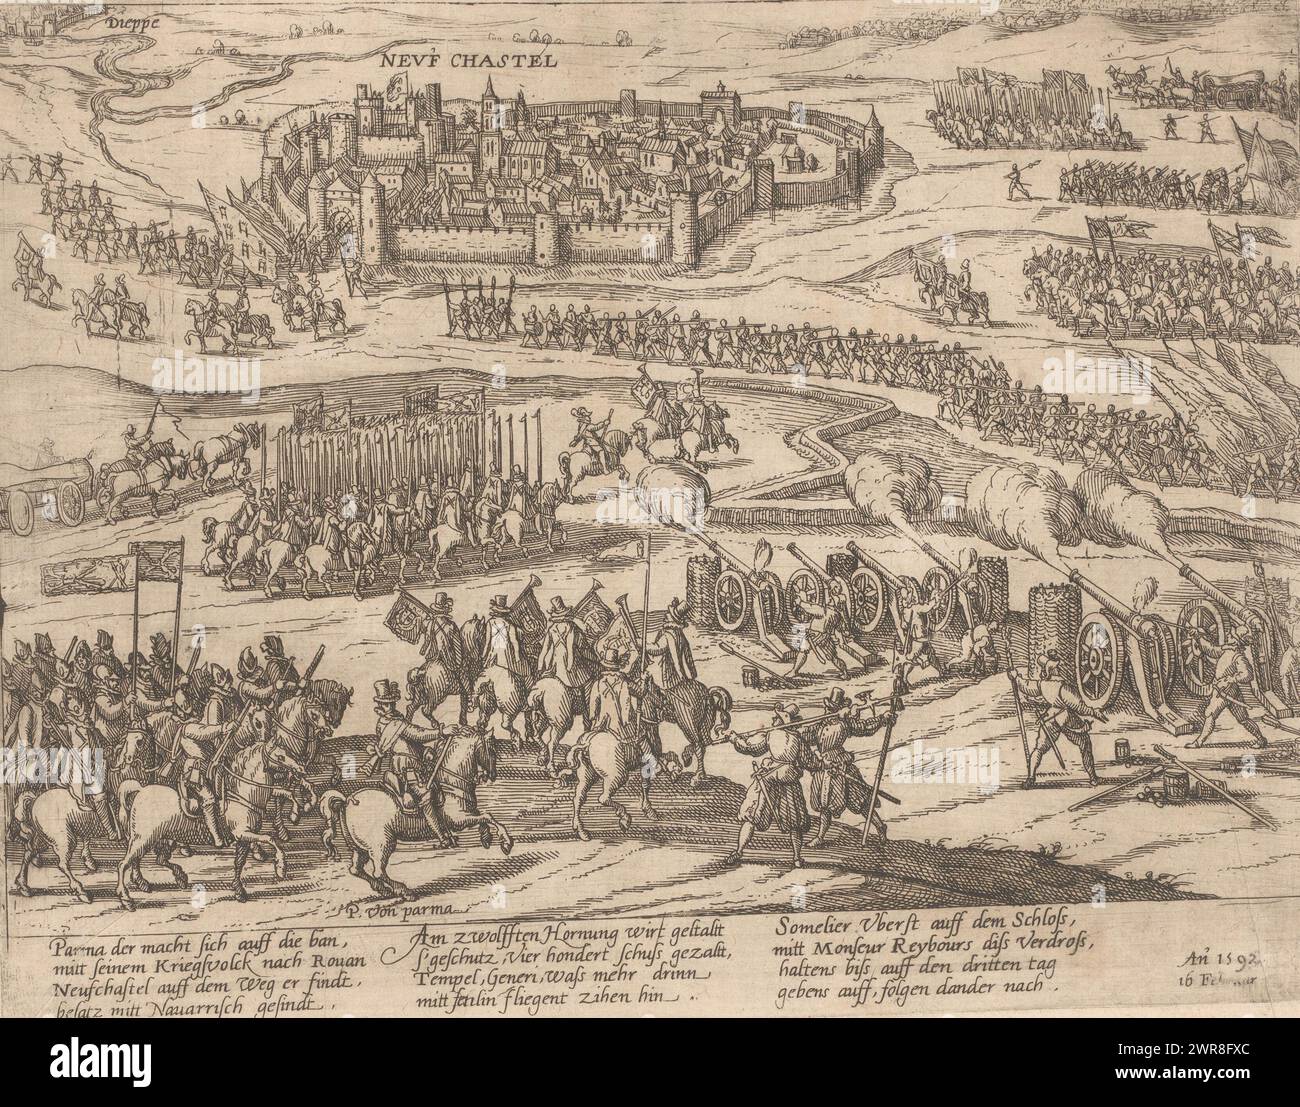 The conquest of Neuchâtel by the Duke of Parma, 1592, Neuf Chastel / Parma der Macht sich auss die ban, mett seinem (...) (title on object), print maker: anonymous, in or after c. 1592, paper, etching, height 211 mm × width 269 mm, print Stock Photo